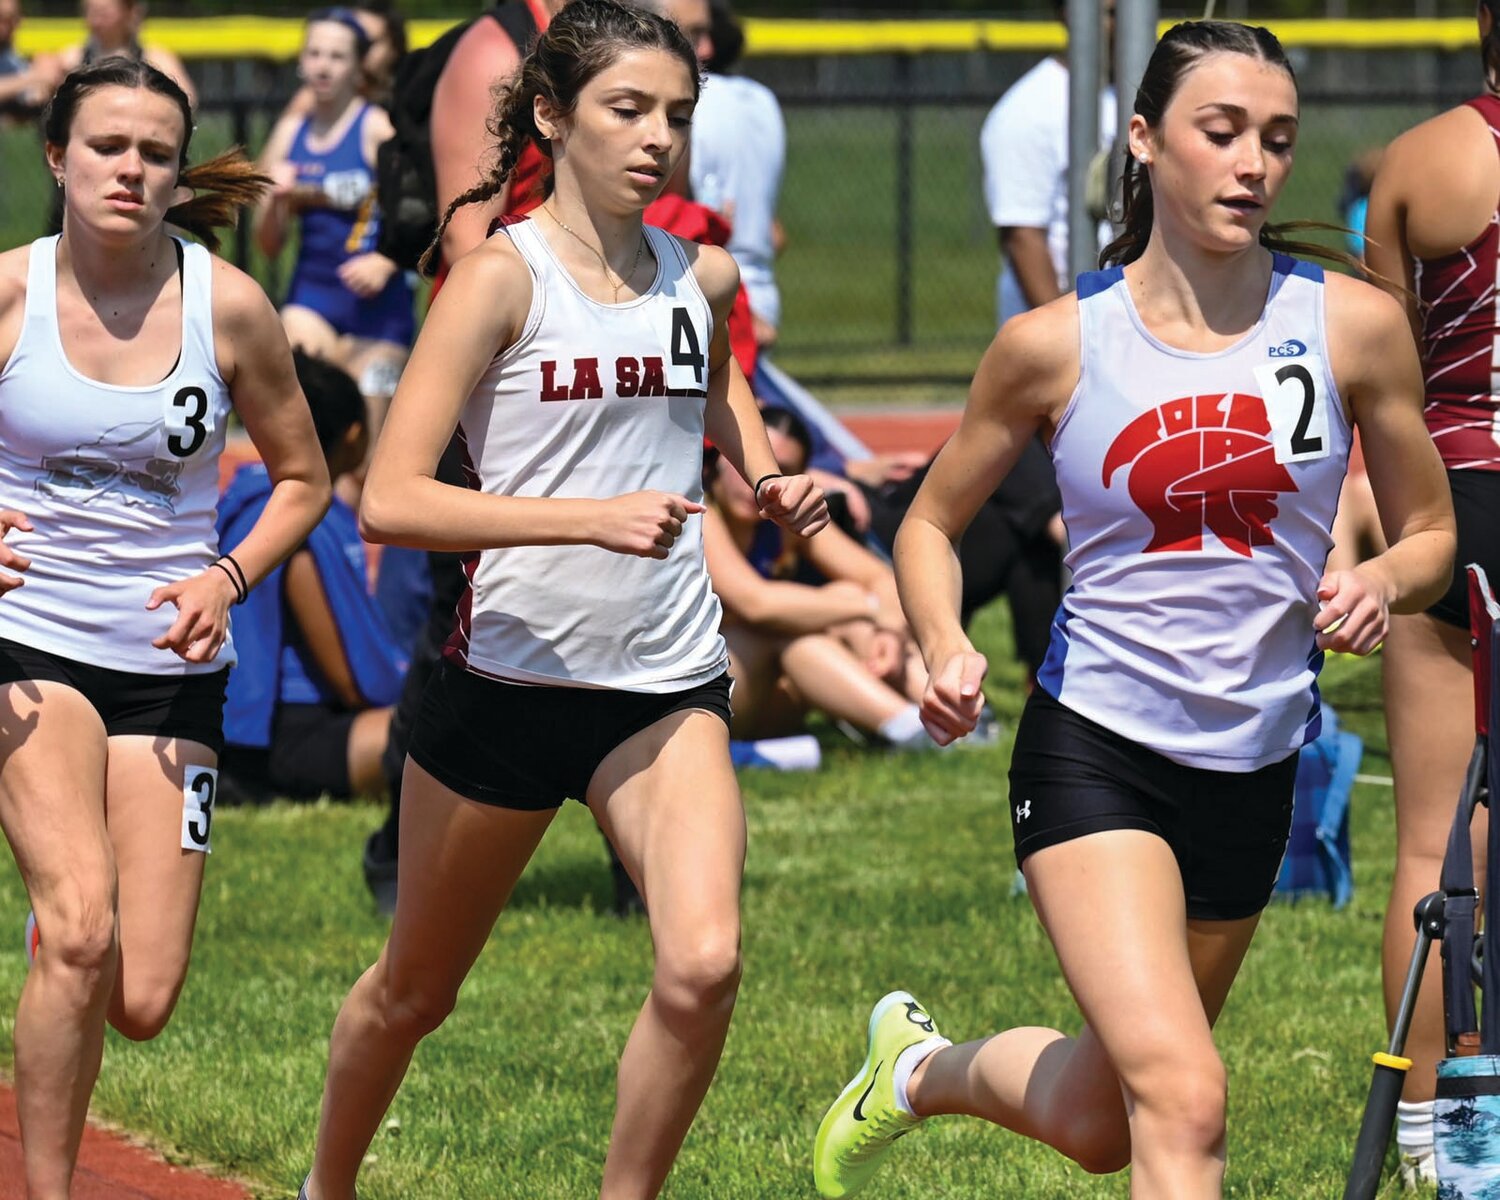 FIRST PLACE: Toll Gate’s Alison Pankowicz (right), who won the 1,500 competes against Pilgrim’s Keaney Bayha (left), who took third.